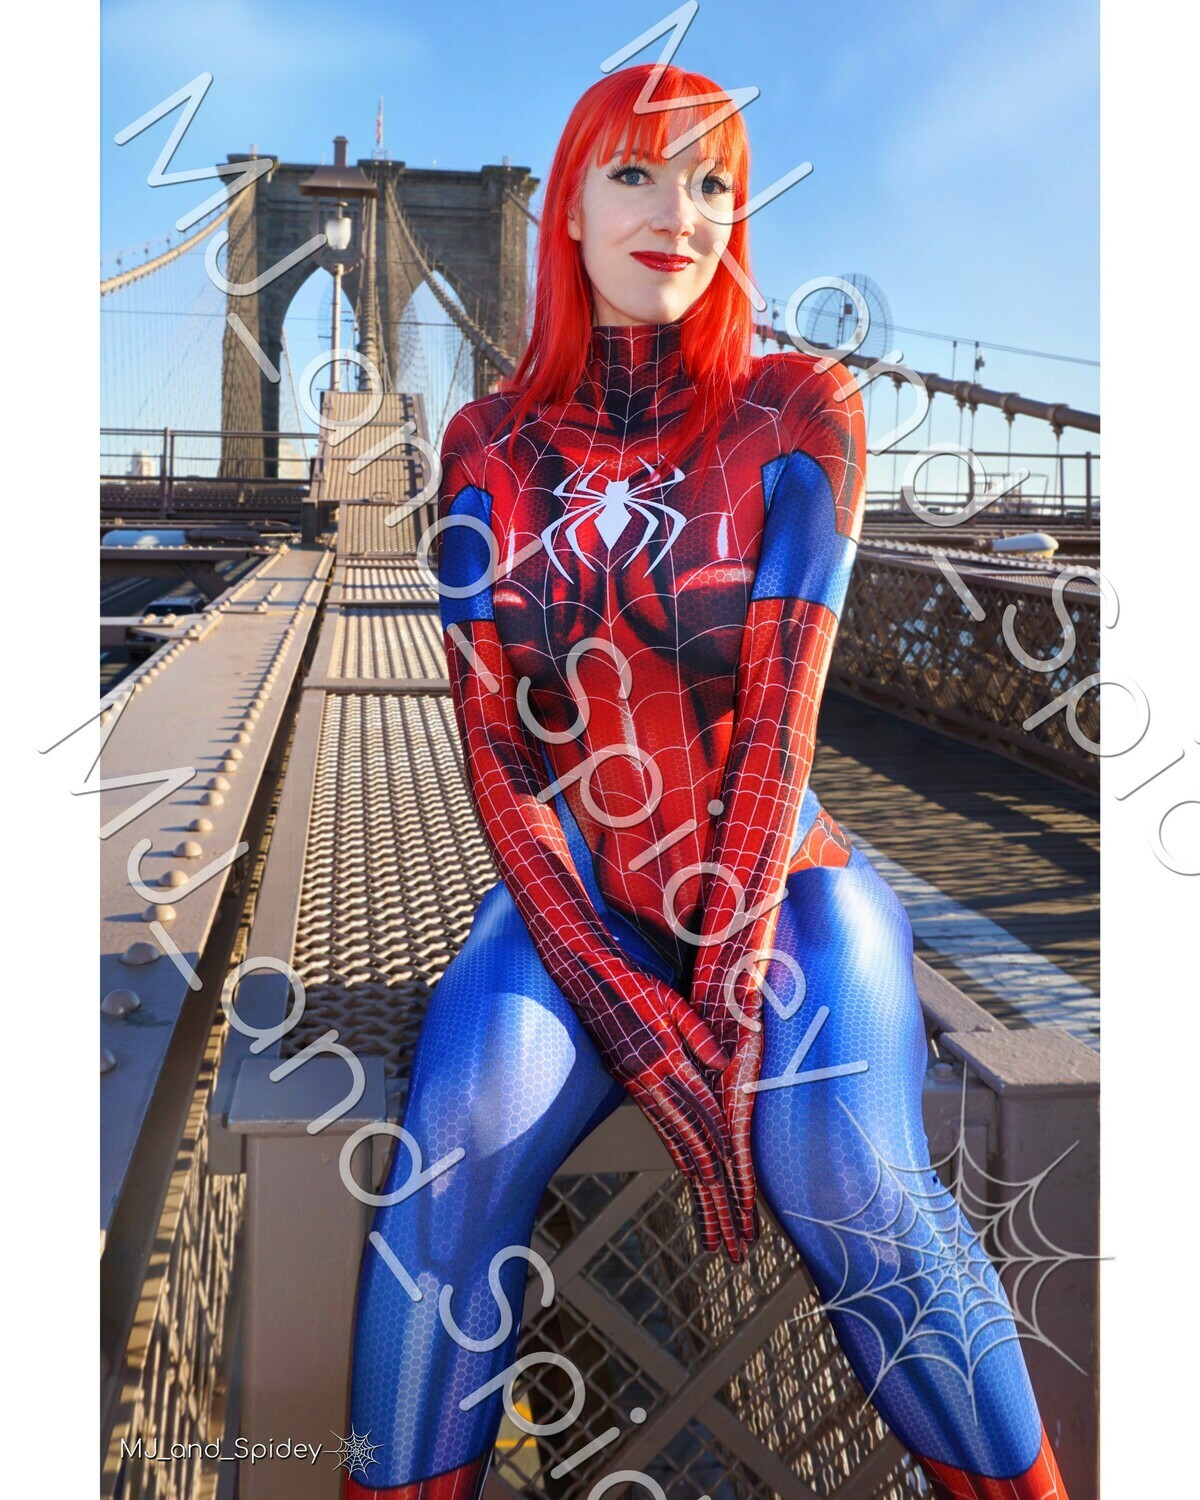 Marvel - Spider-Man - Mary Jane Watson - Classic Spider-Suit - NYC 2 - Digital Cosplay Image (@MJ_and_Spidey, MJ and Spidey, Comics)